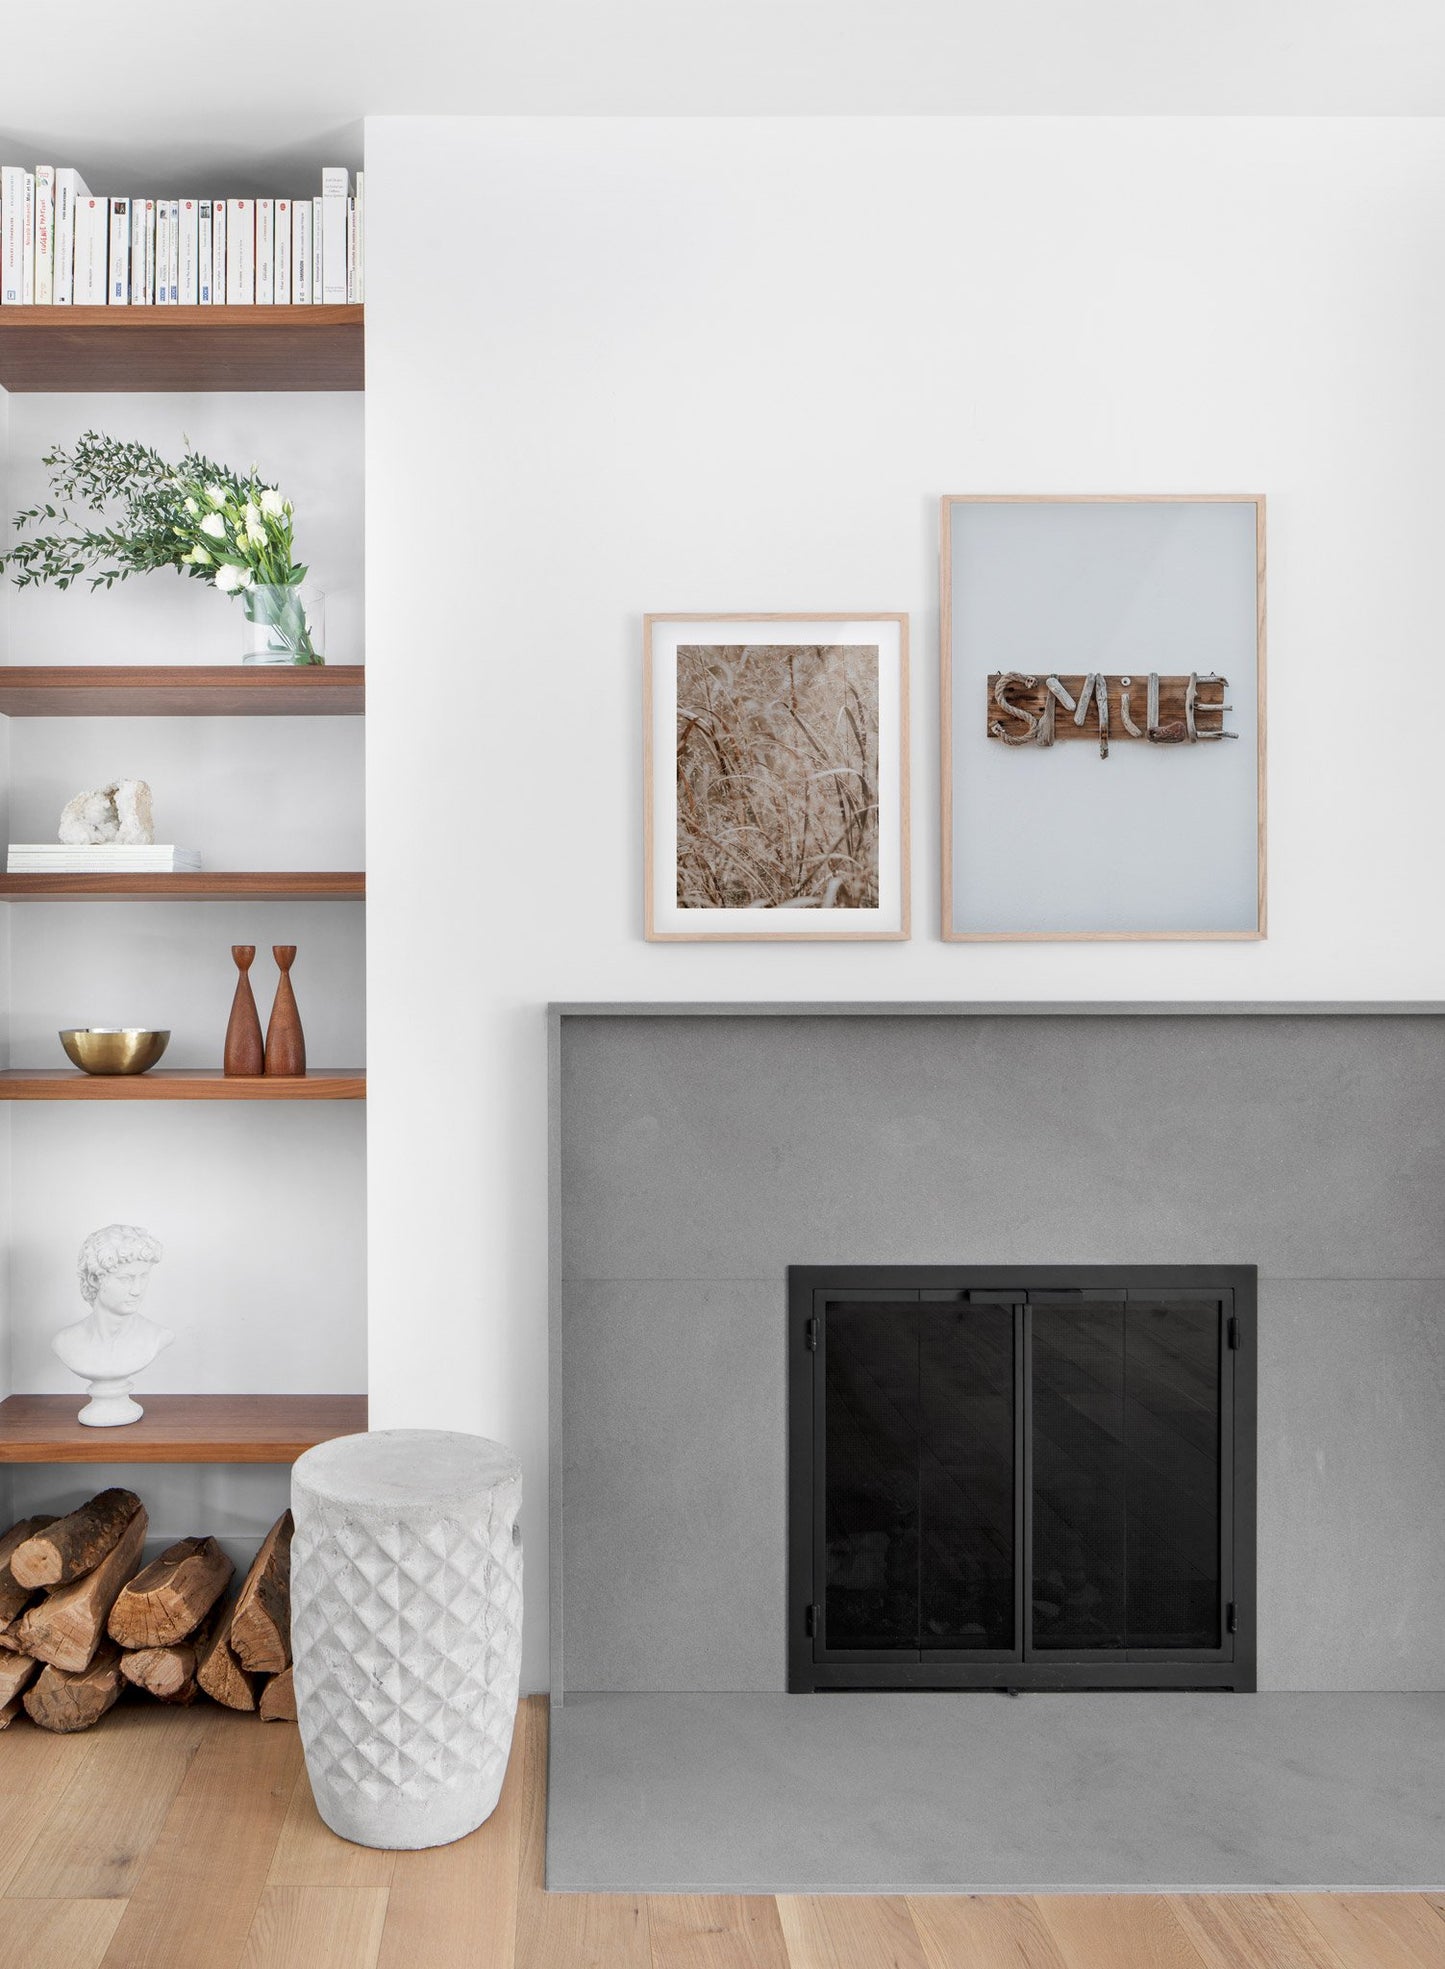 Smile modern minimalist photography poster by Opposite Wall - Living room with a fireplace